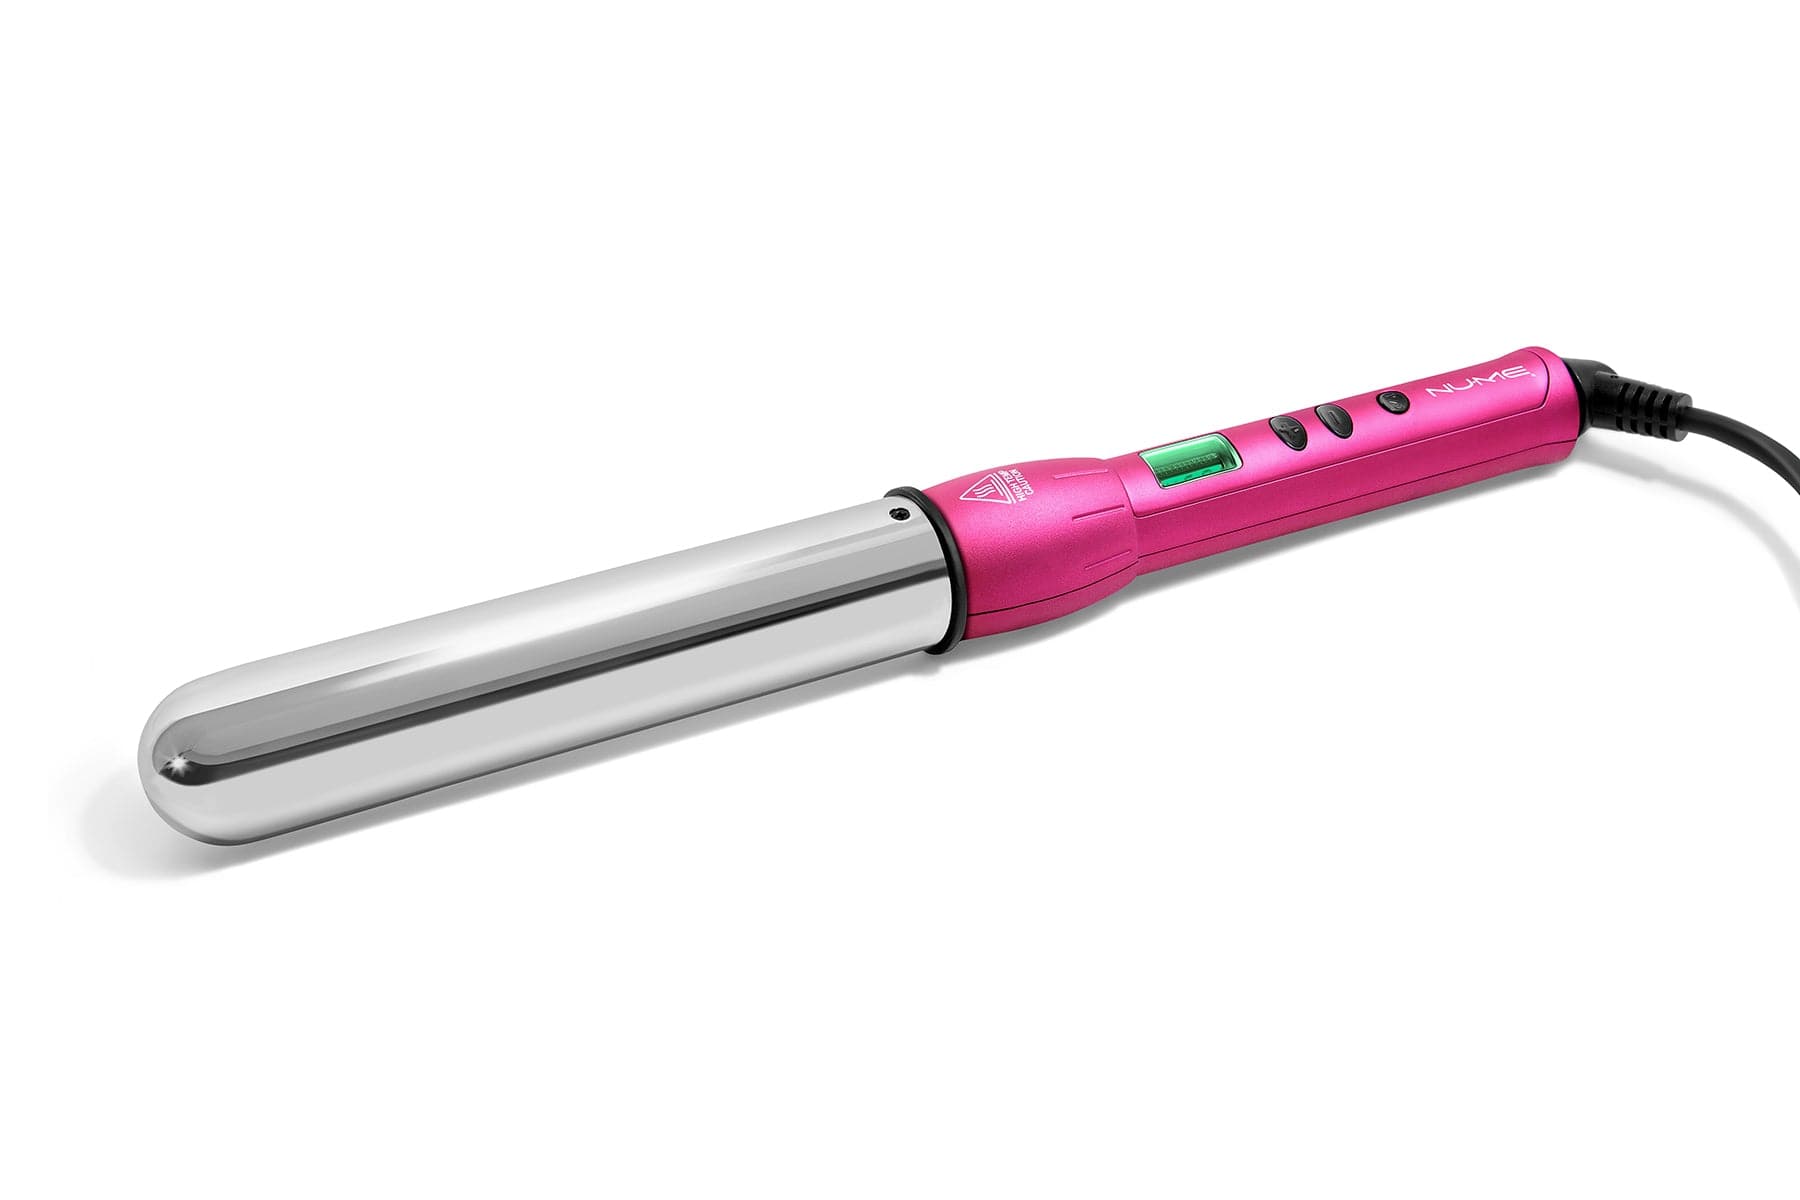  NuMe Magic Curling Wand by NuMe NuMe Perfumarie